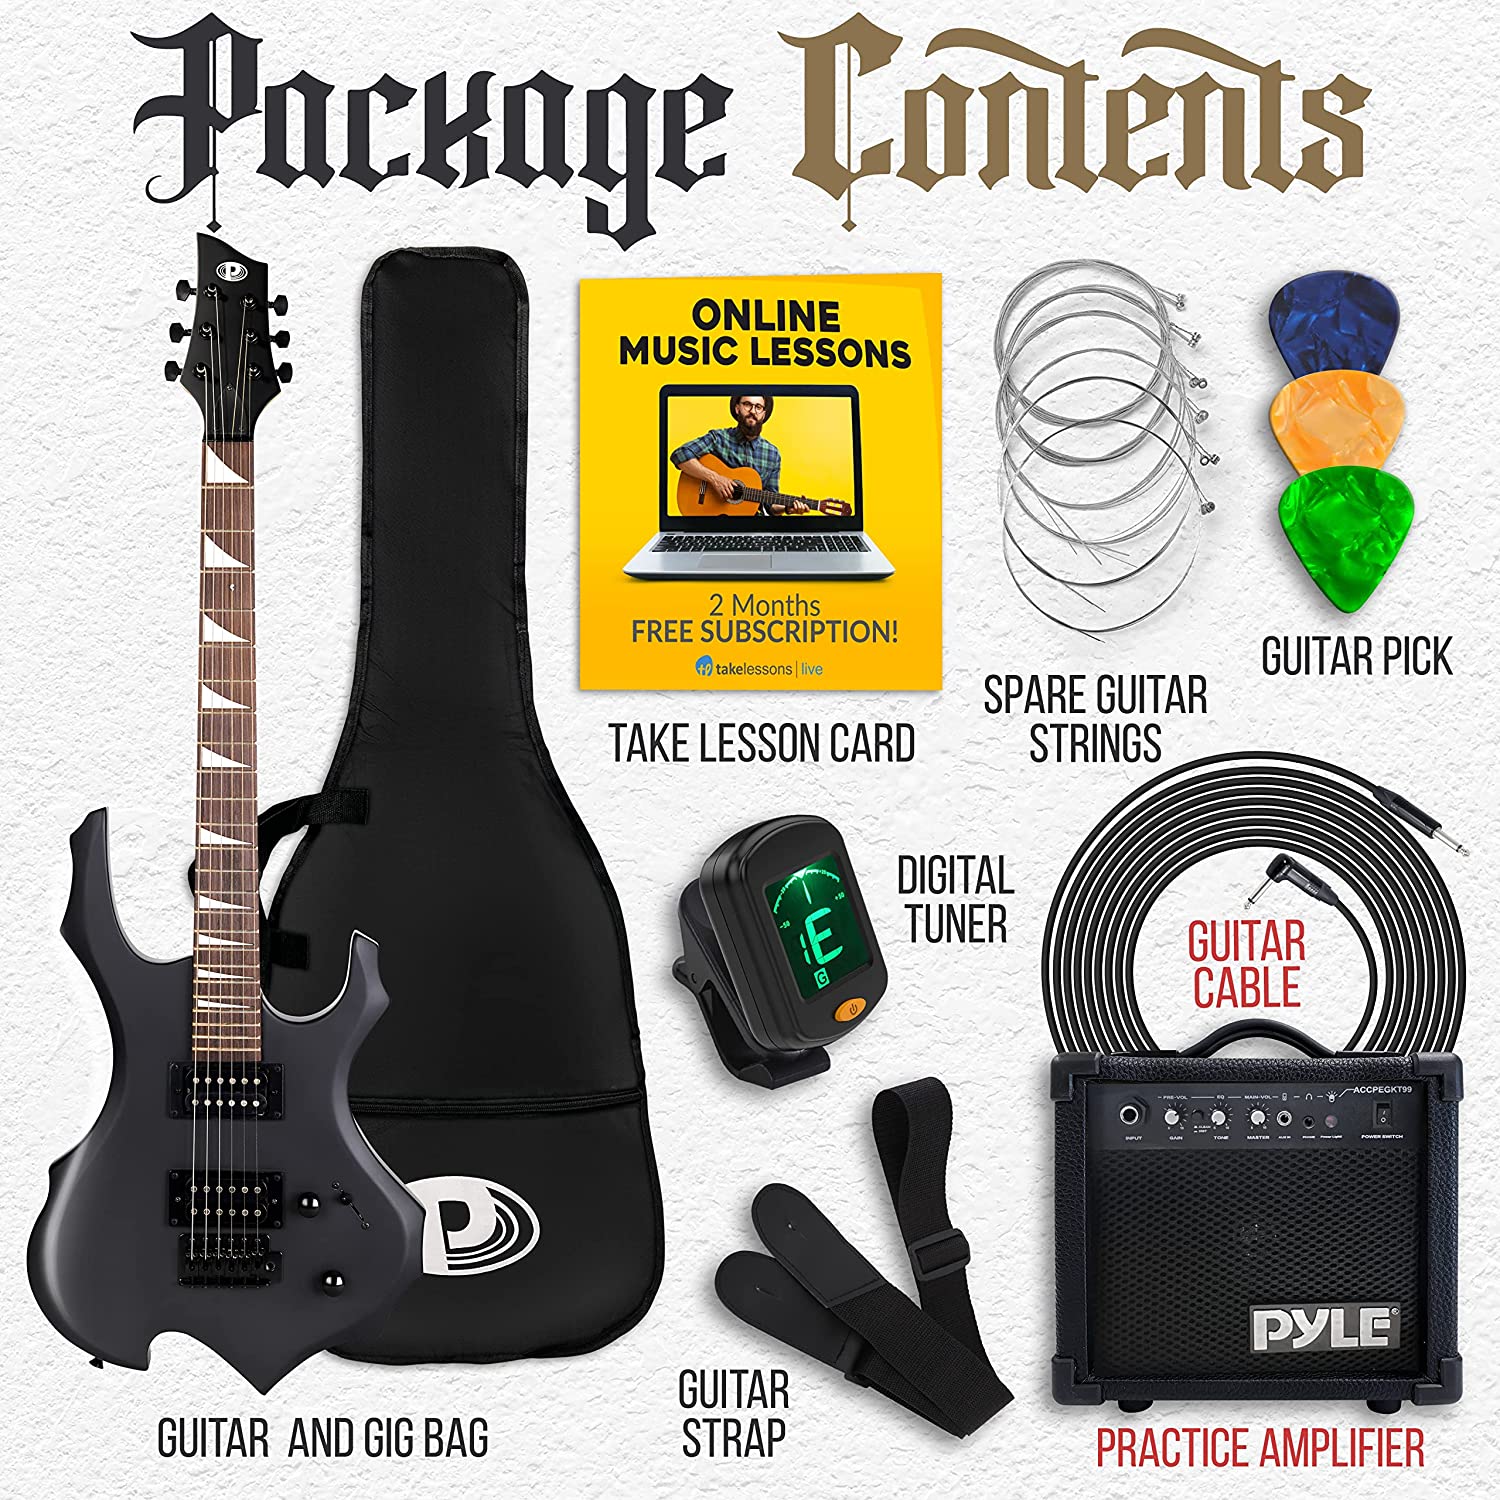 Pyle Heavy Metal Electric Guitar Axe W/ Amplifier Kit, Full Size Instrument  W/ Amp  Accessories